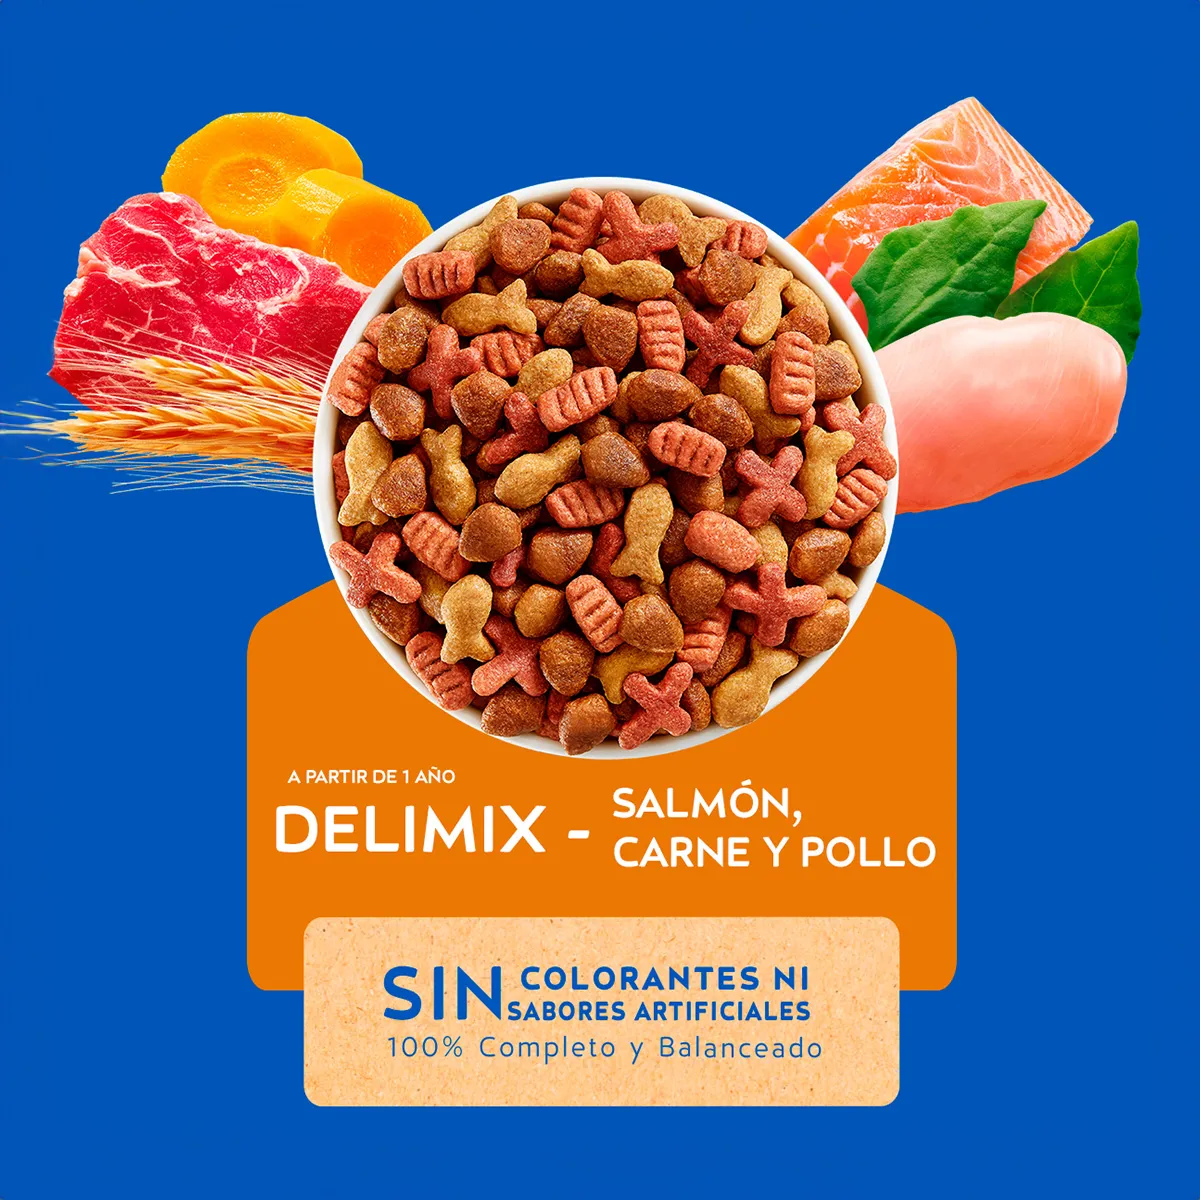 1. Product out of package - Delimix.jpg